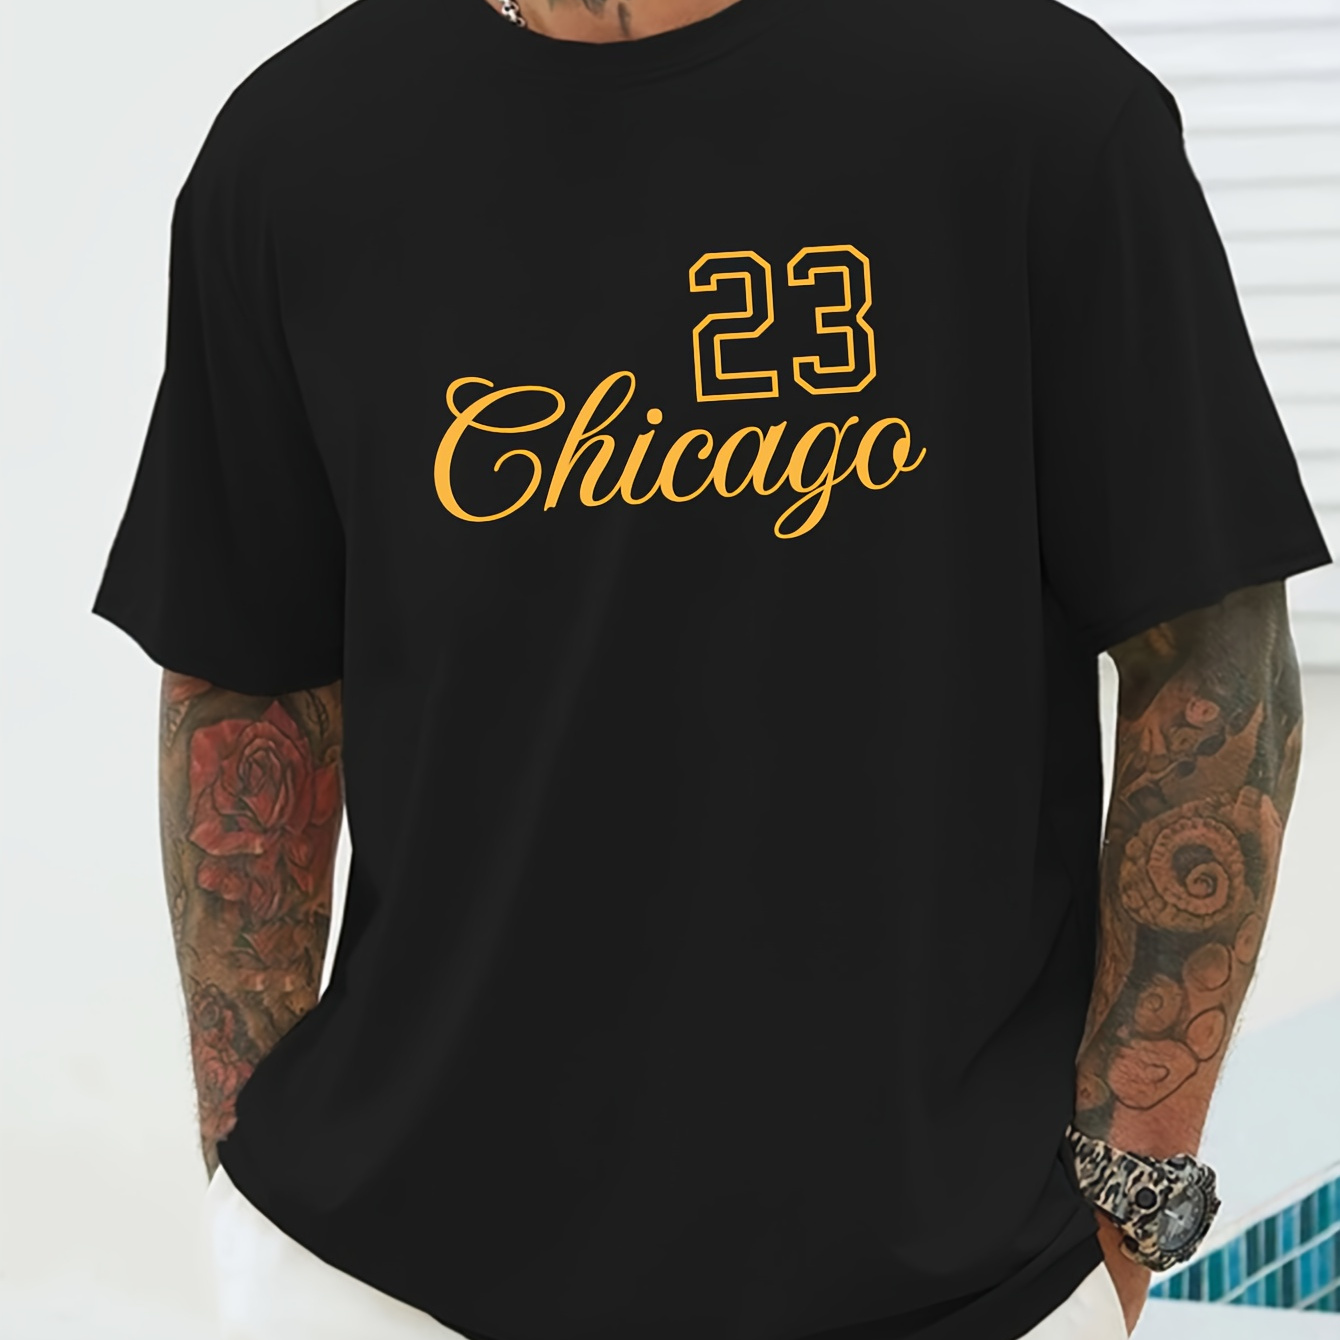 

23 Chicago Print Men's Round Neck Short Sleeve Tee Fashion Regular Fit T-shirt Top For Spring Summer Holiday